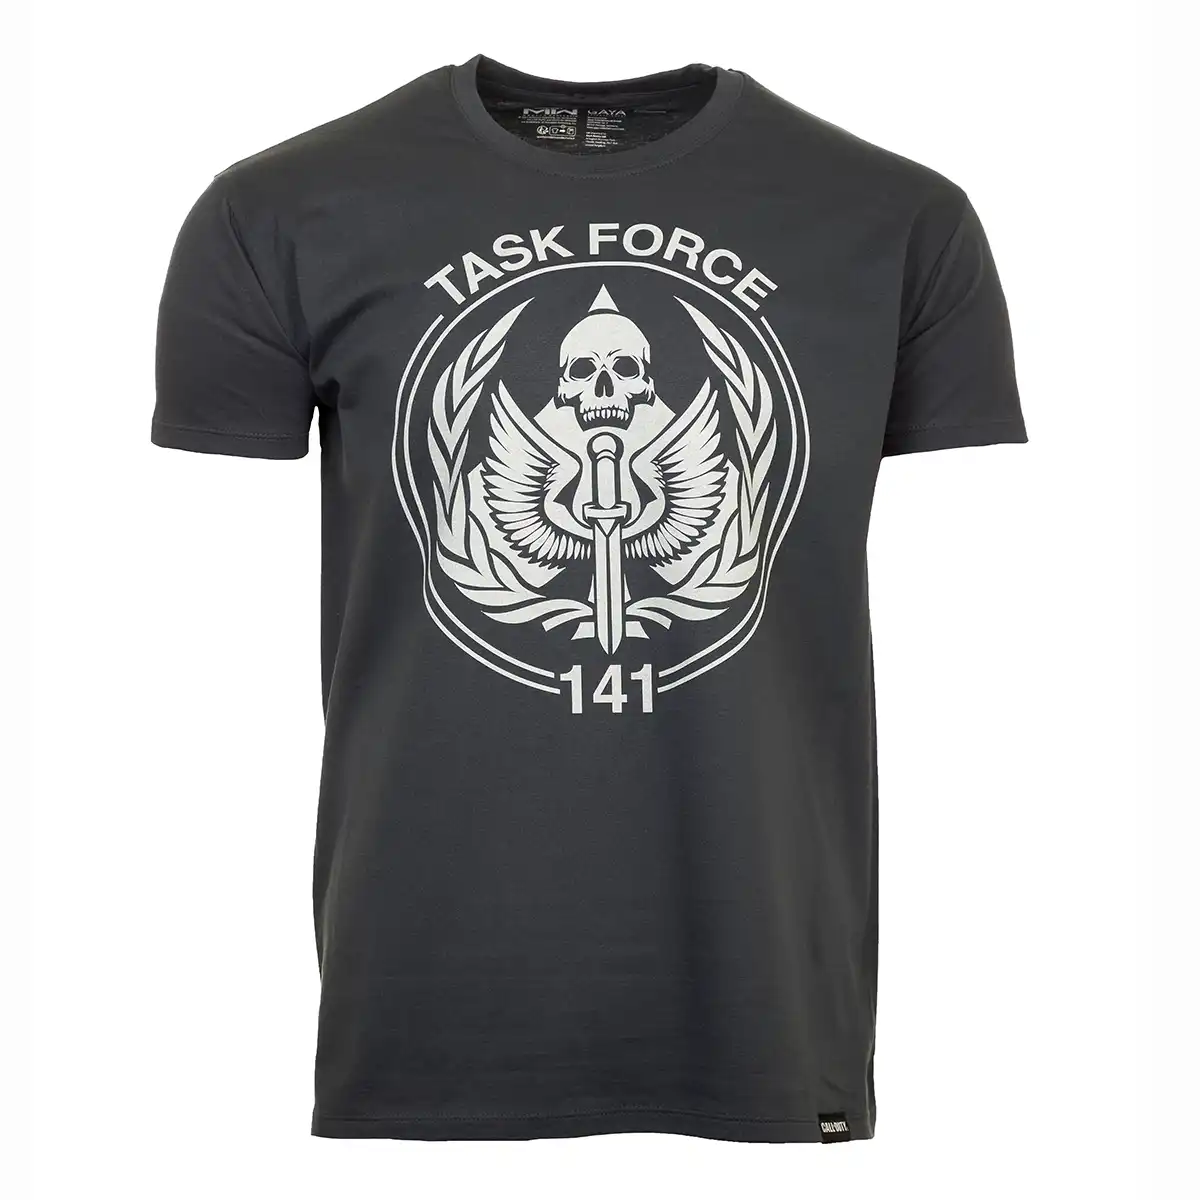 Call of Duty T-Shirt "Task Force Icon" Mousegrey M